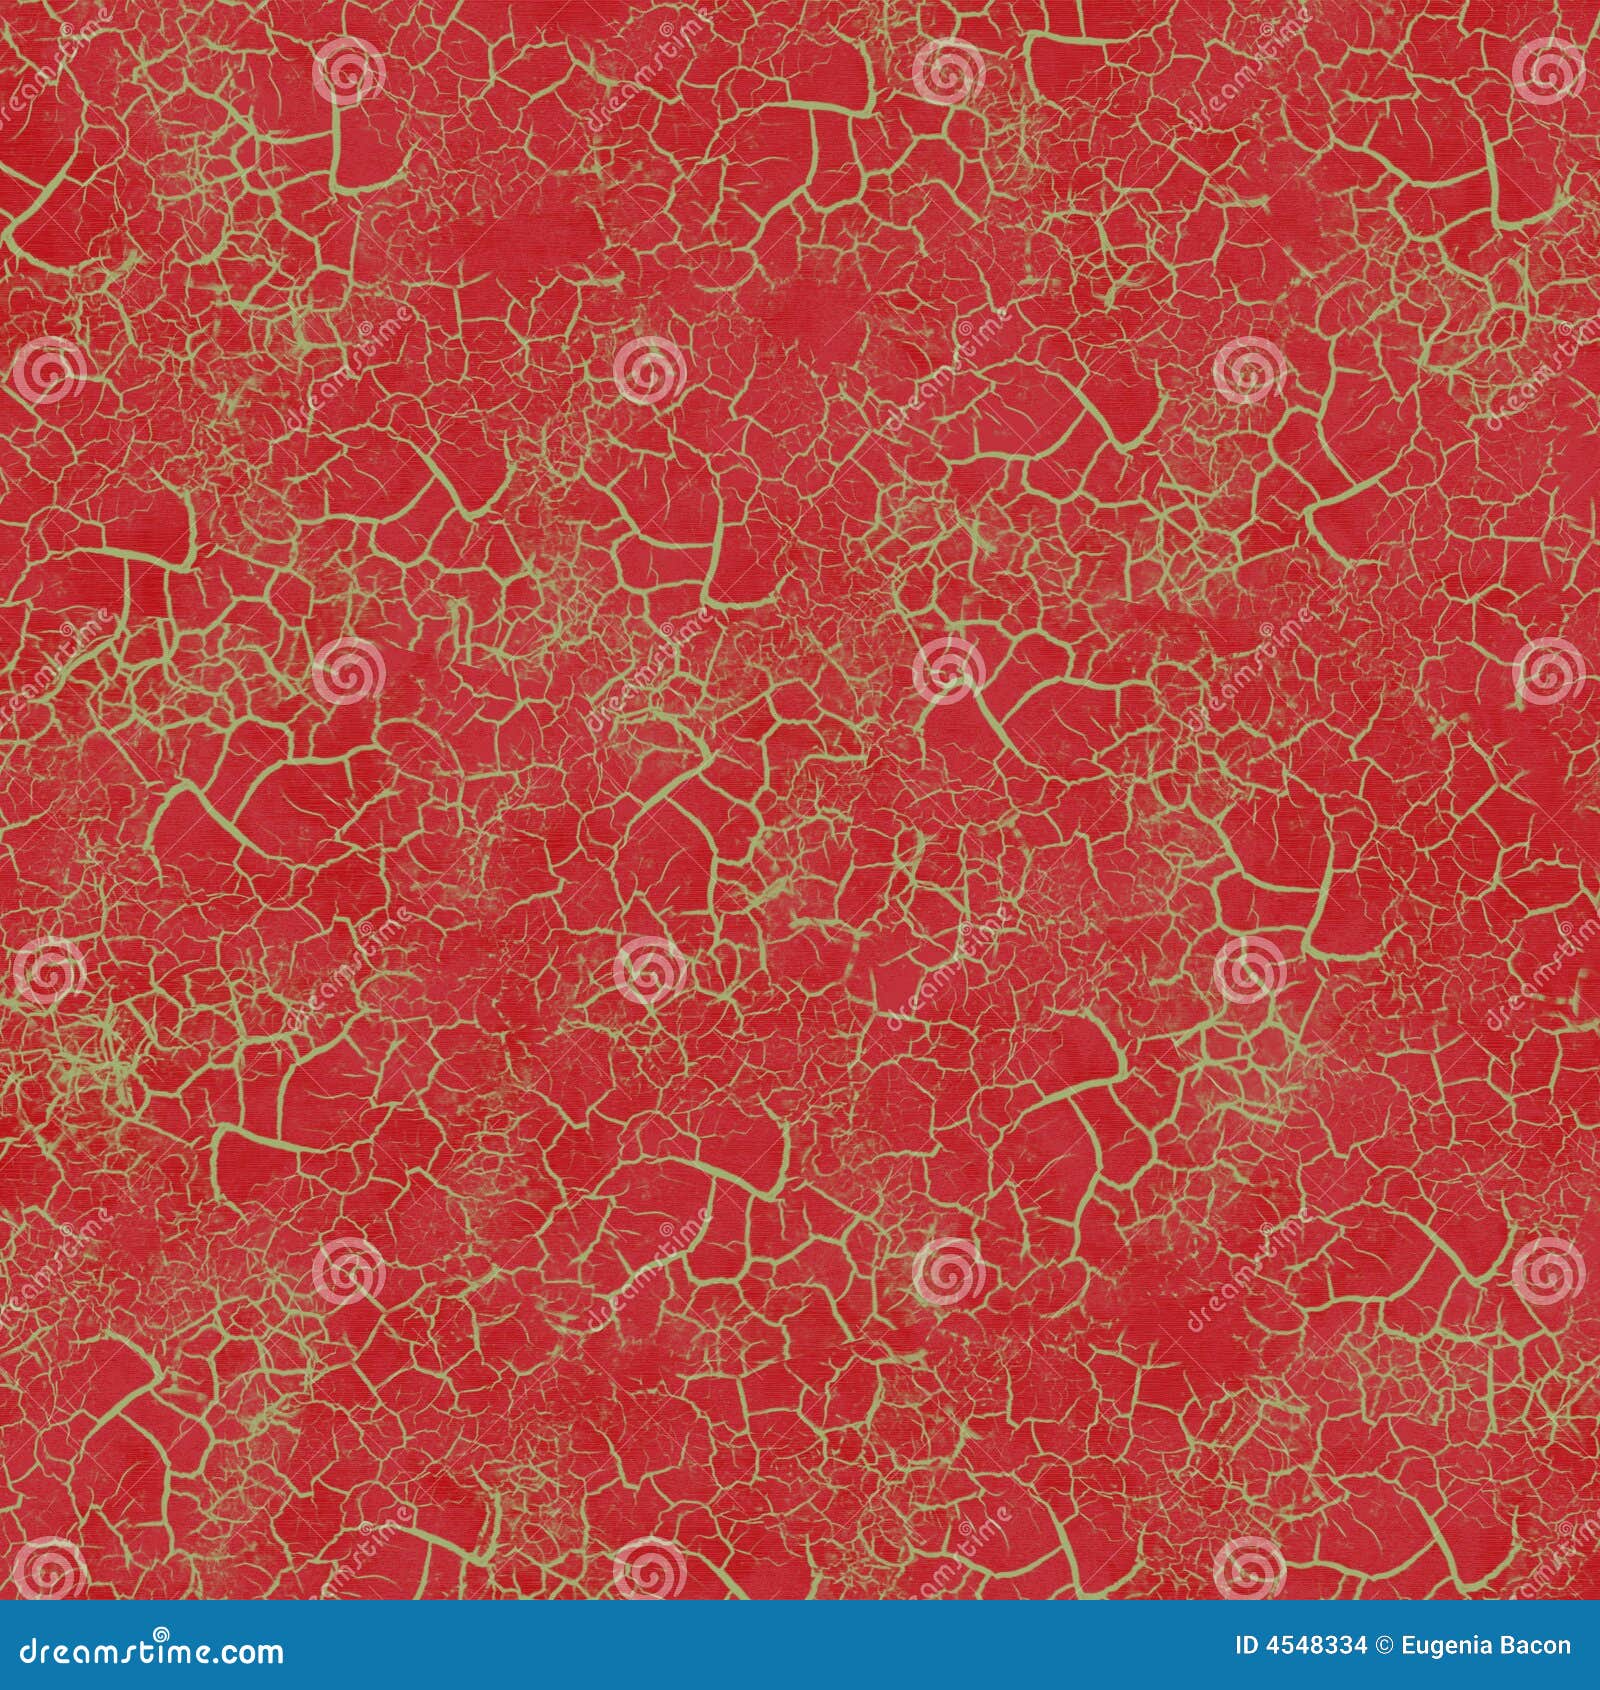 rich red christmas crackle background